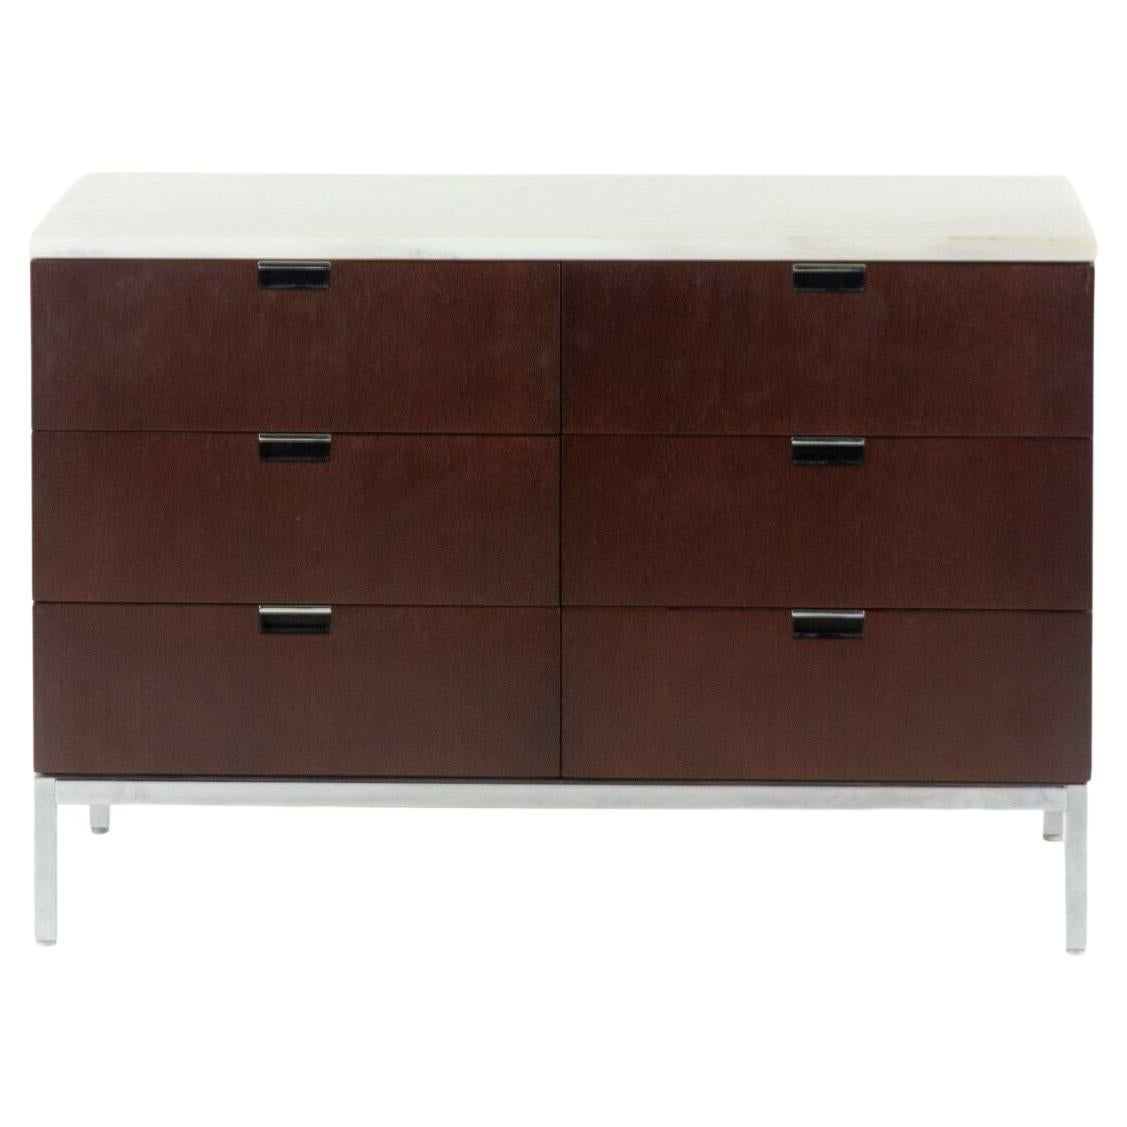 1970s Florence Knoll International 6 Drawer Credenza Dresser with Marble Top For Sale